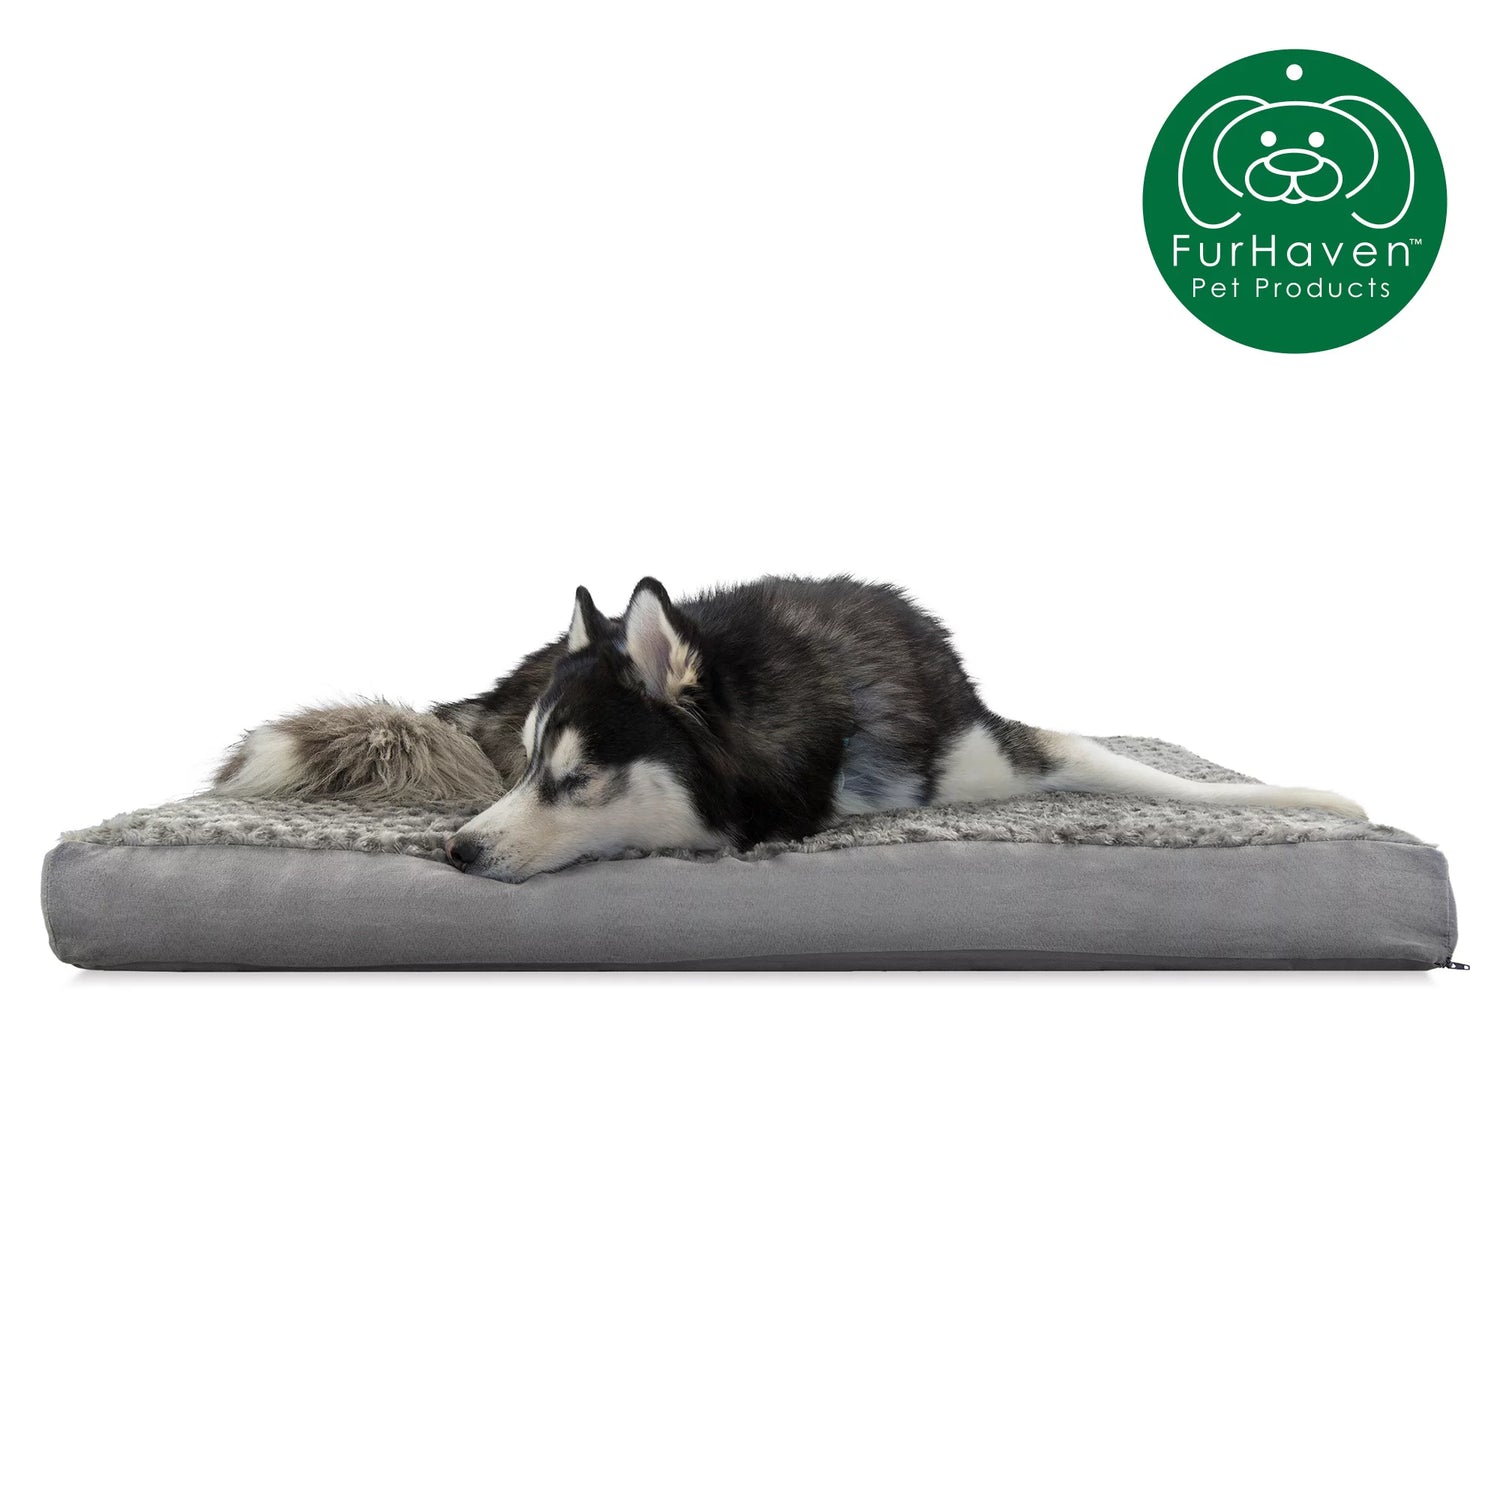 Furhaven Pet Dog Bed | Deluxe Memory Foam Ultra Plush Mattress Pet Bed for Dogs & Cats, Chocolate, Large Animals & Pet Supplies > Pet Supplies > Cat Supplies > Cat Beds FurHaven Pet Cooling Gel Foam Jumbo Gray